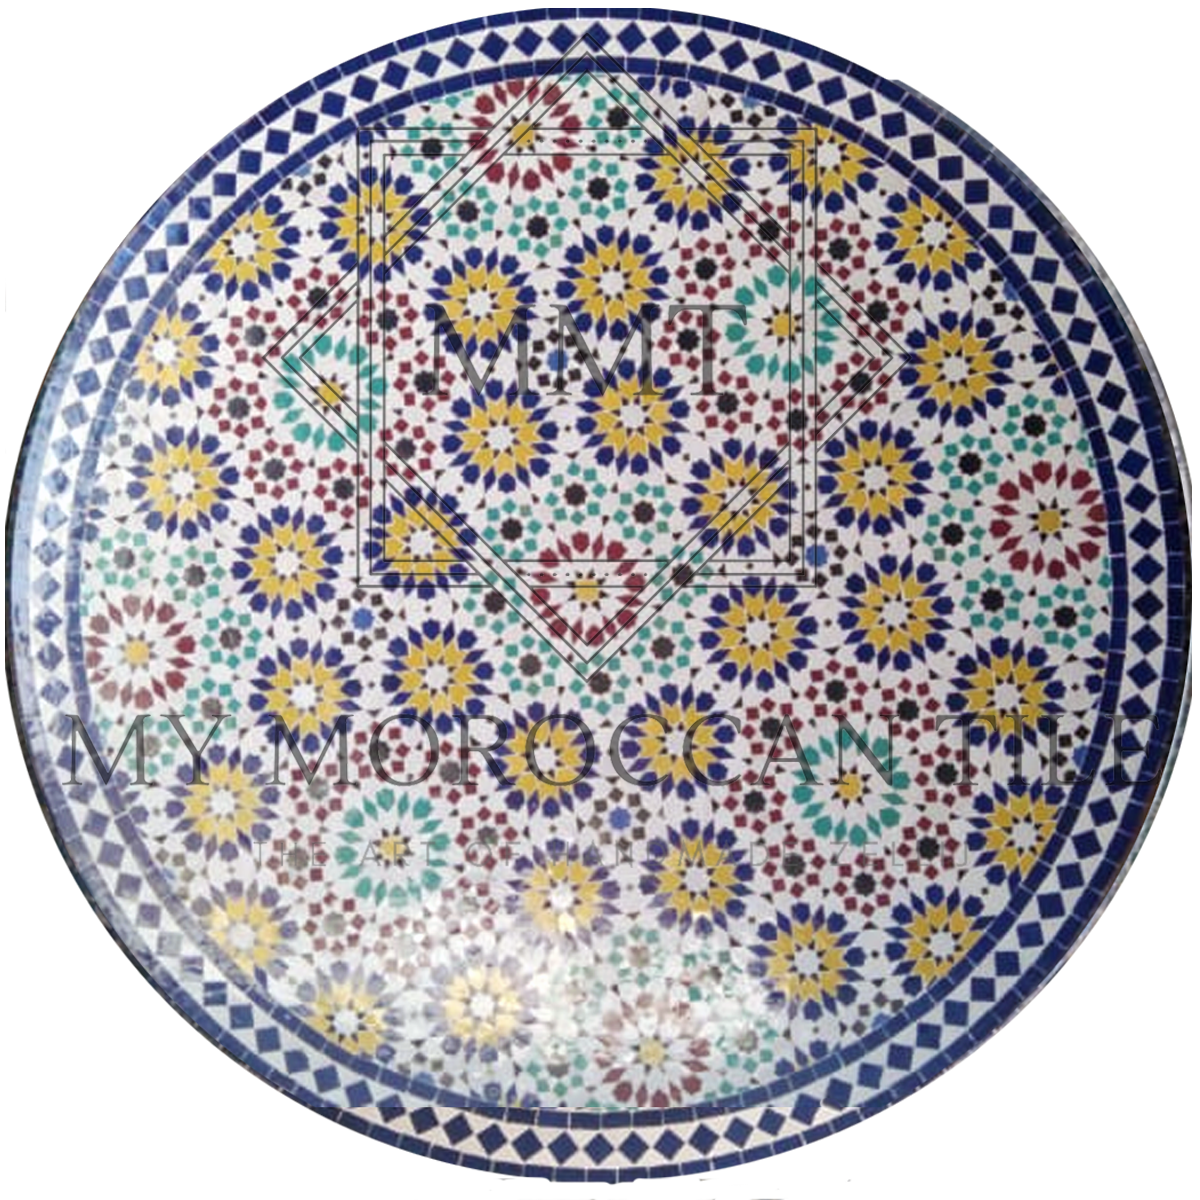 Fez Moroccan Mosaic Table Top 8182